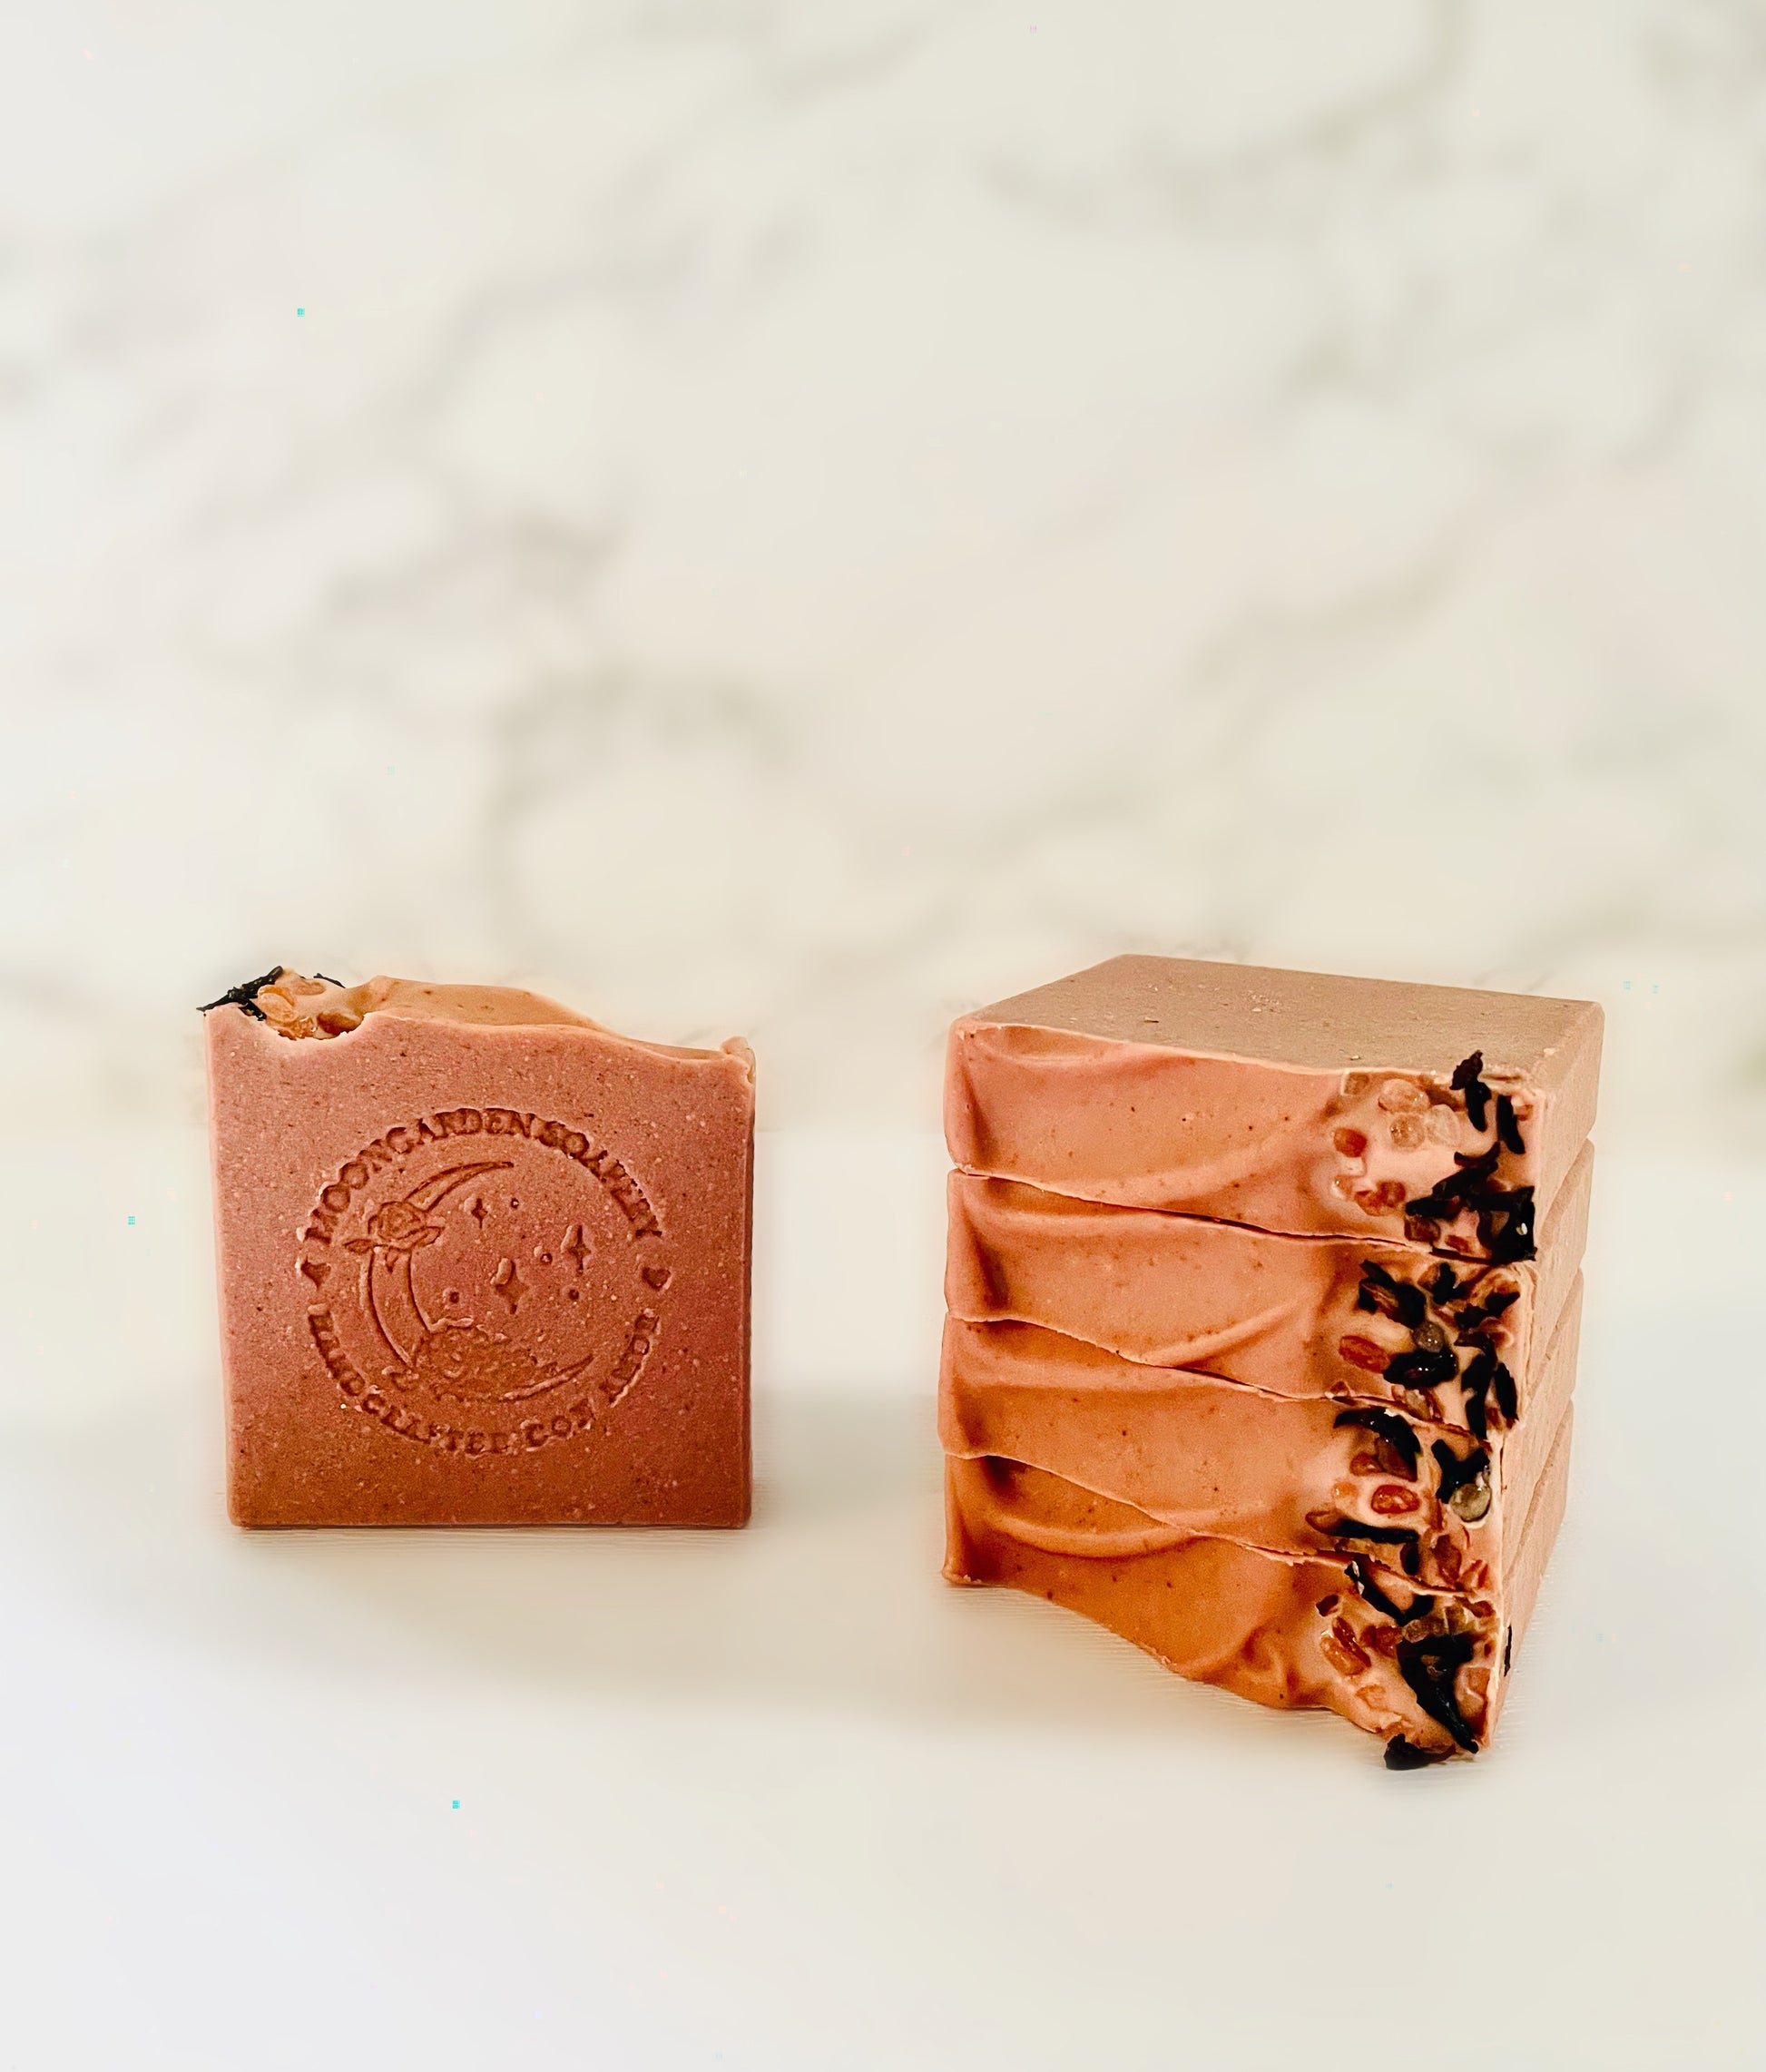 One rose clay facial bar soap stands on the left. Four rose clay facial bar soaps are stacked above each other on the right side. Each facial bar soap is topped with pink Himalayan sea salt and dried hibiscus flowers on the right. All facial bar soaps sit on top of a marble backdrop.